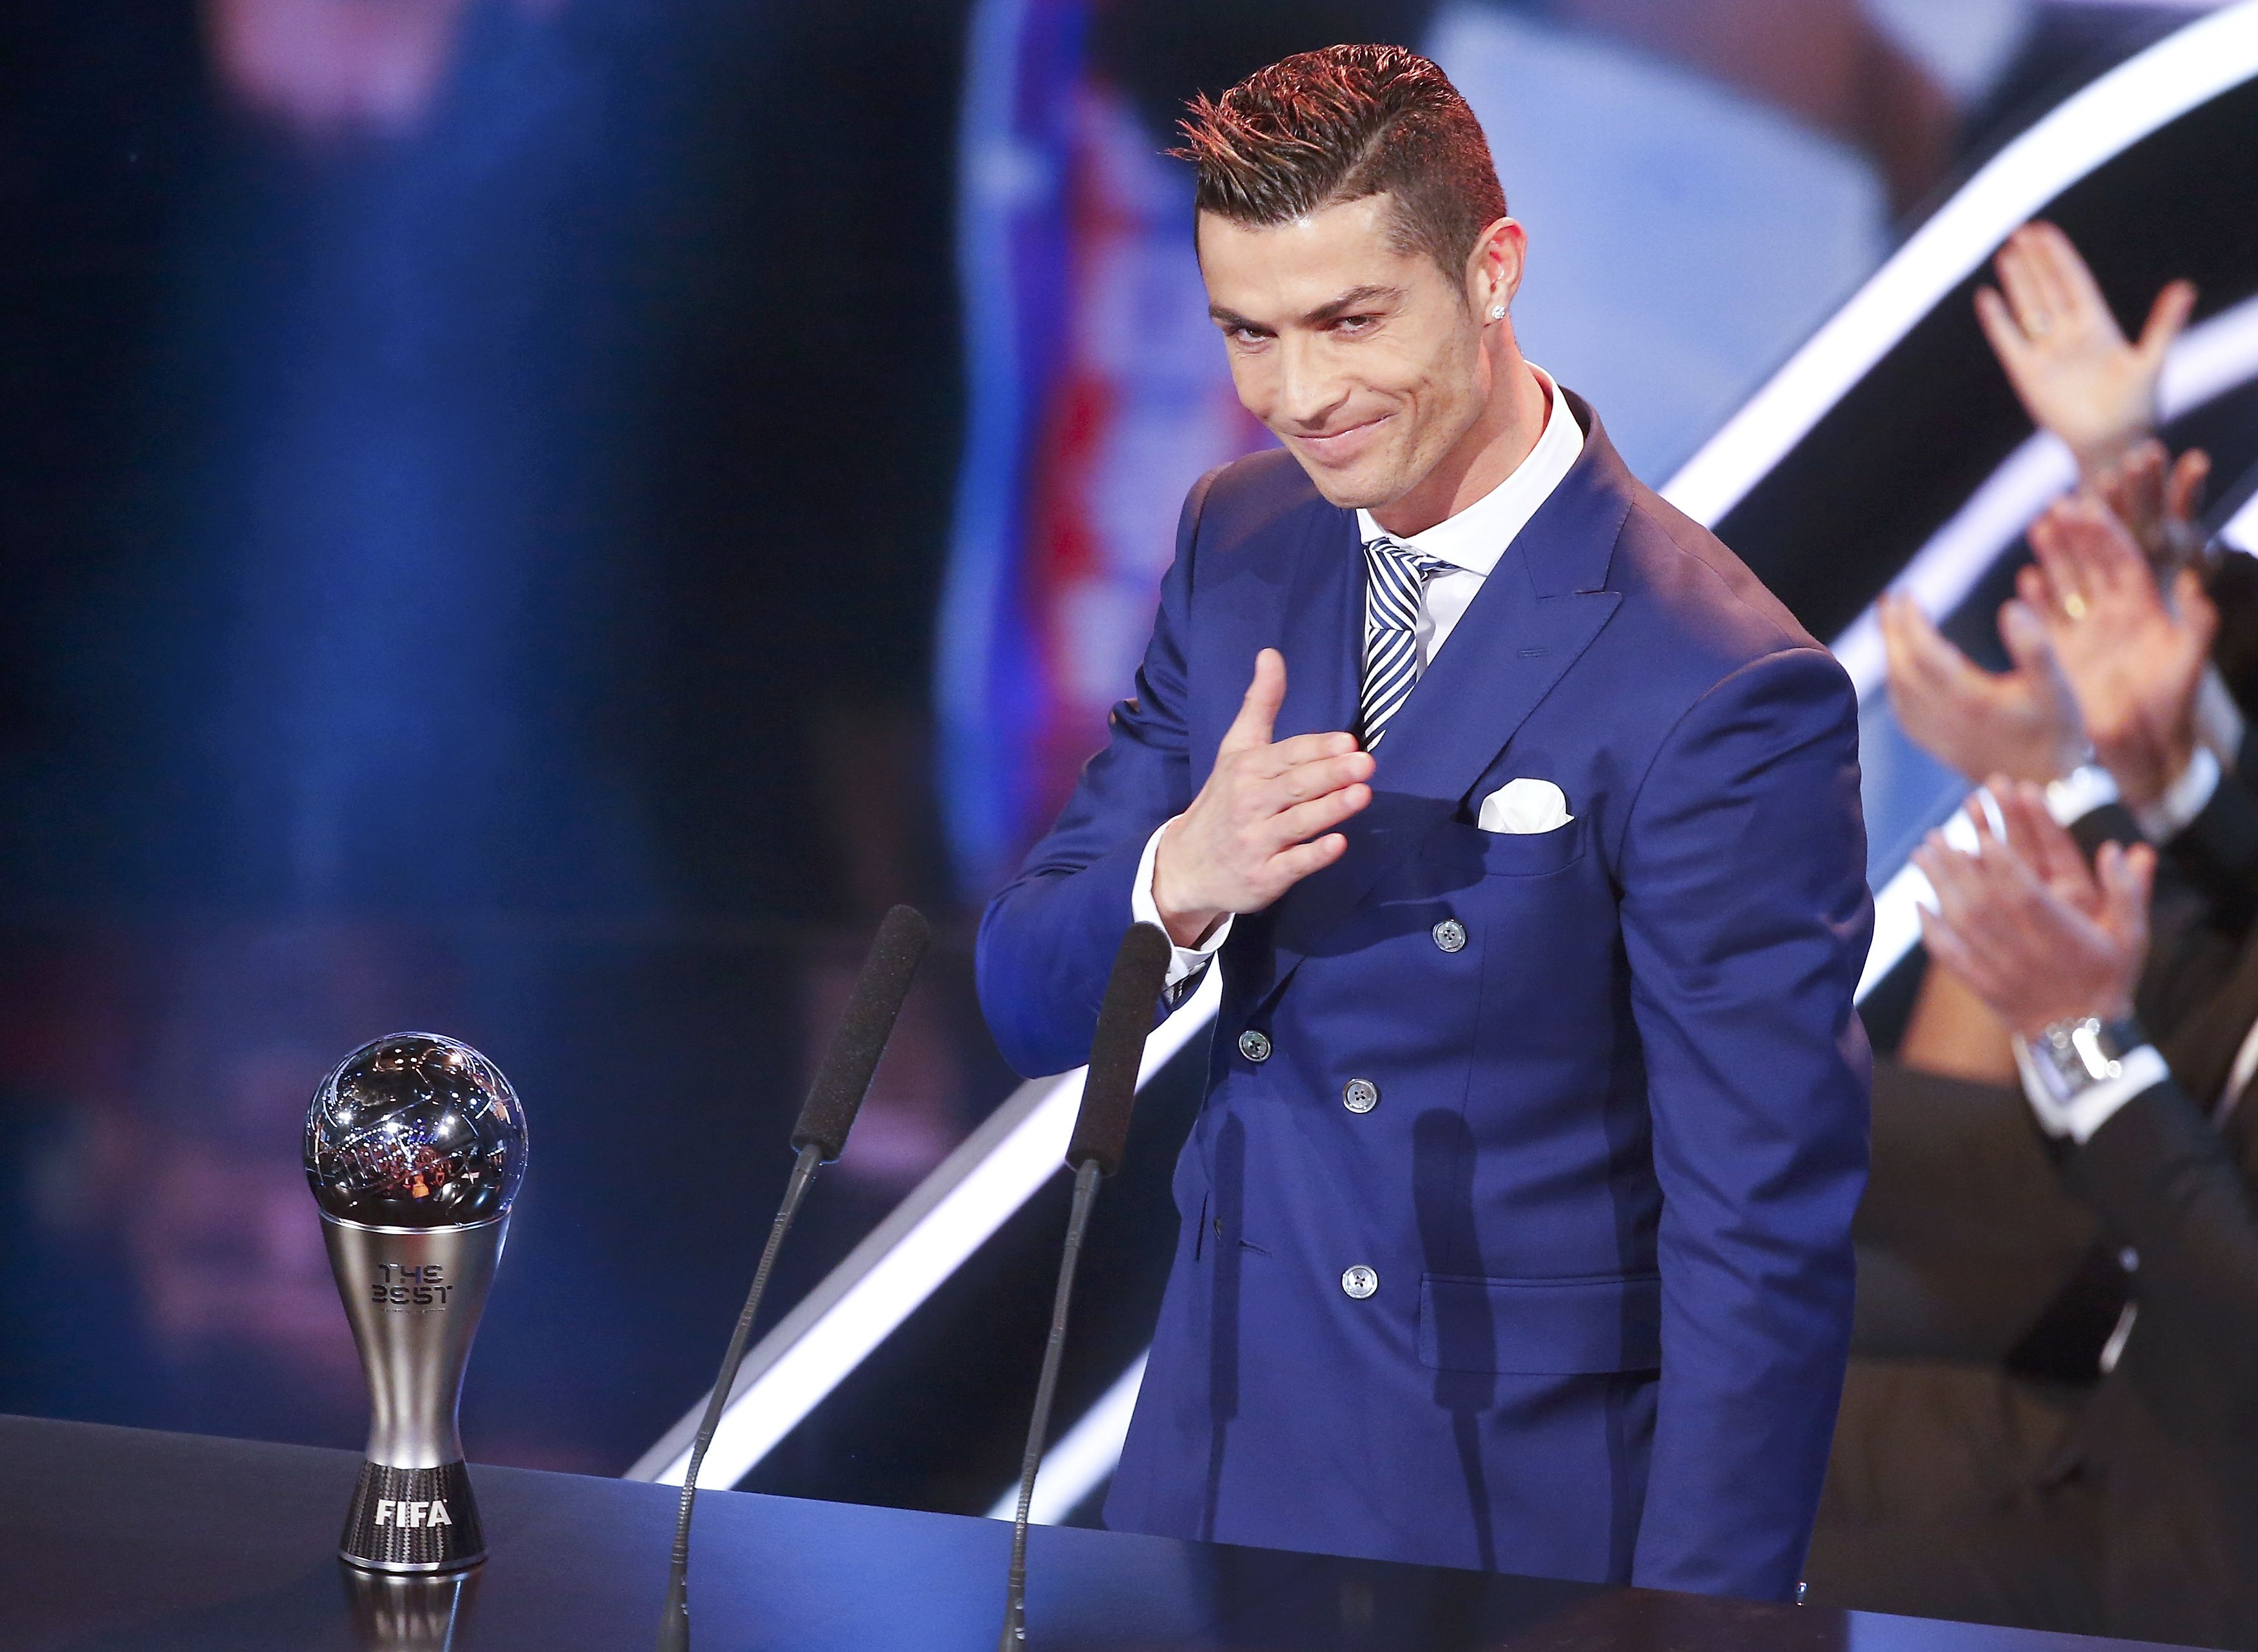 cristiano ronaldo hits back at media campaign against him after winning fifa best player award photo reuters